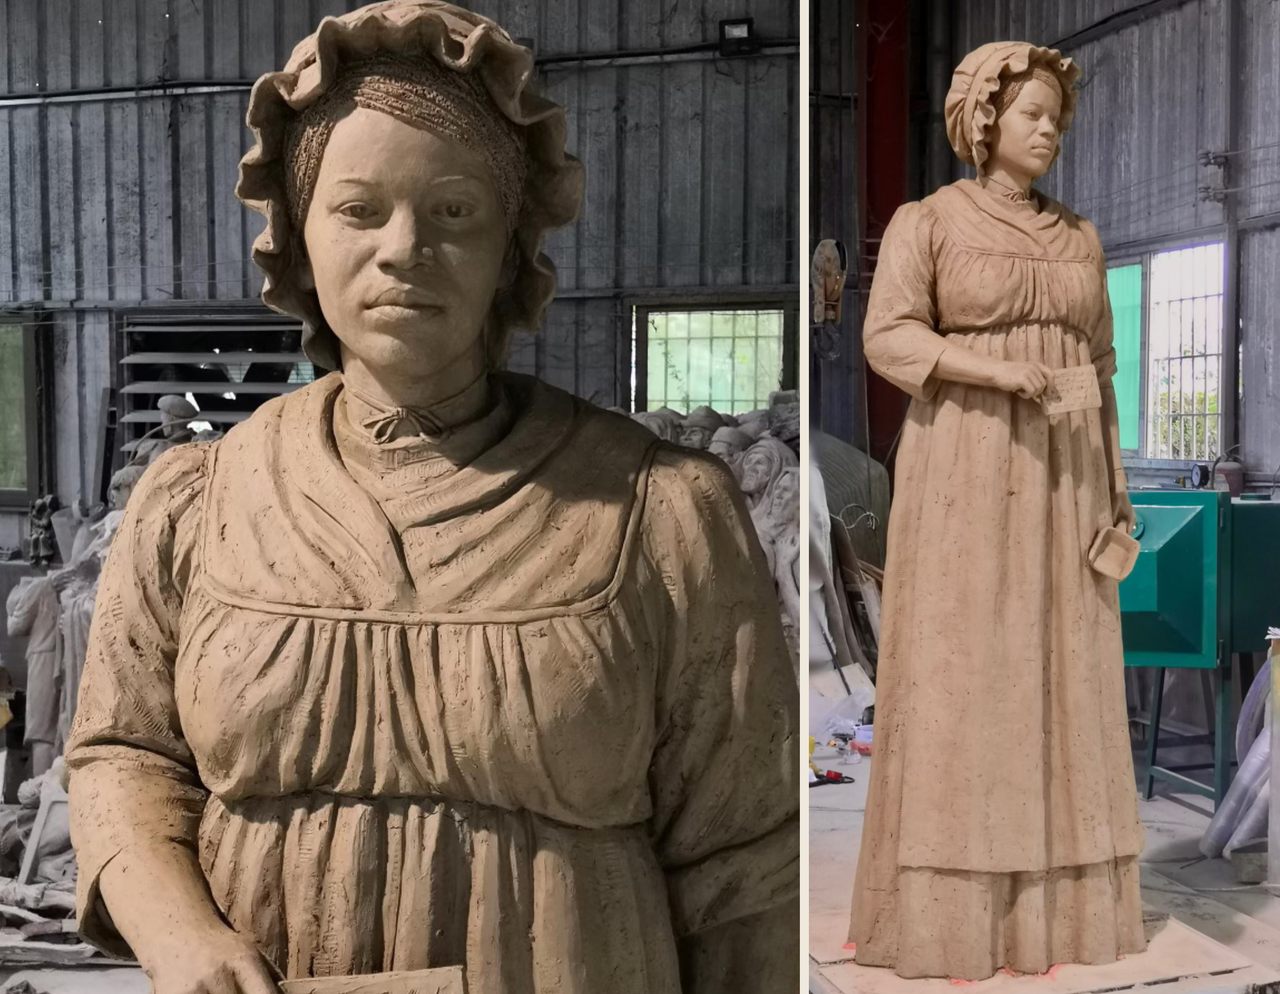 Sculptor Brian Hanlon first created a clay model of Elizabeth Freeman. The finished statue will be made of bronze and stand seven-and-a-half feet tall.